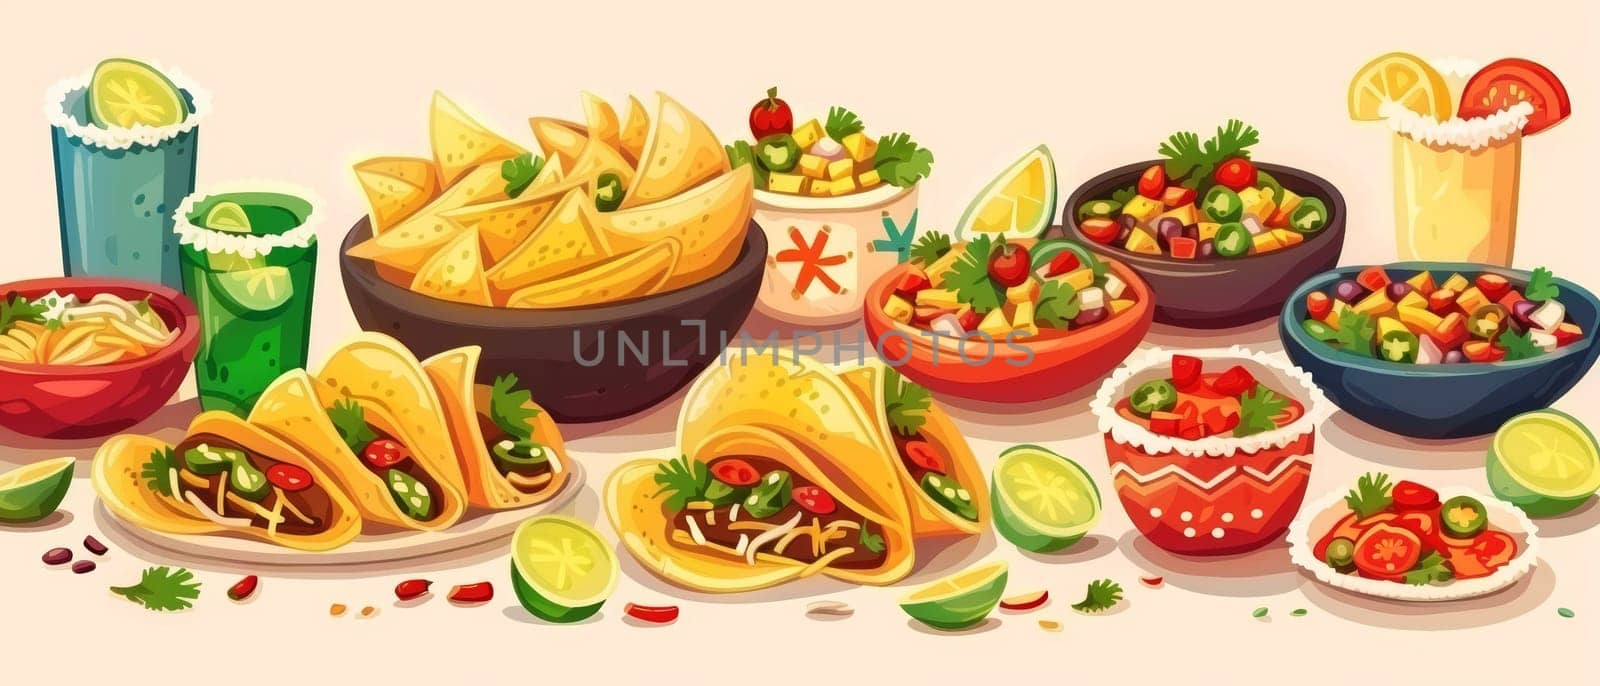 A vibrant and mouthwatering display of classic Mexican dishes, including tacos, salsas, guacamole, and more, creating a festive and flavorful scene